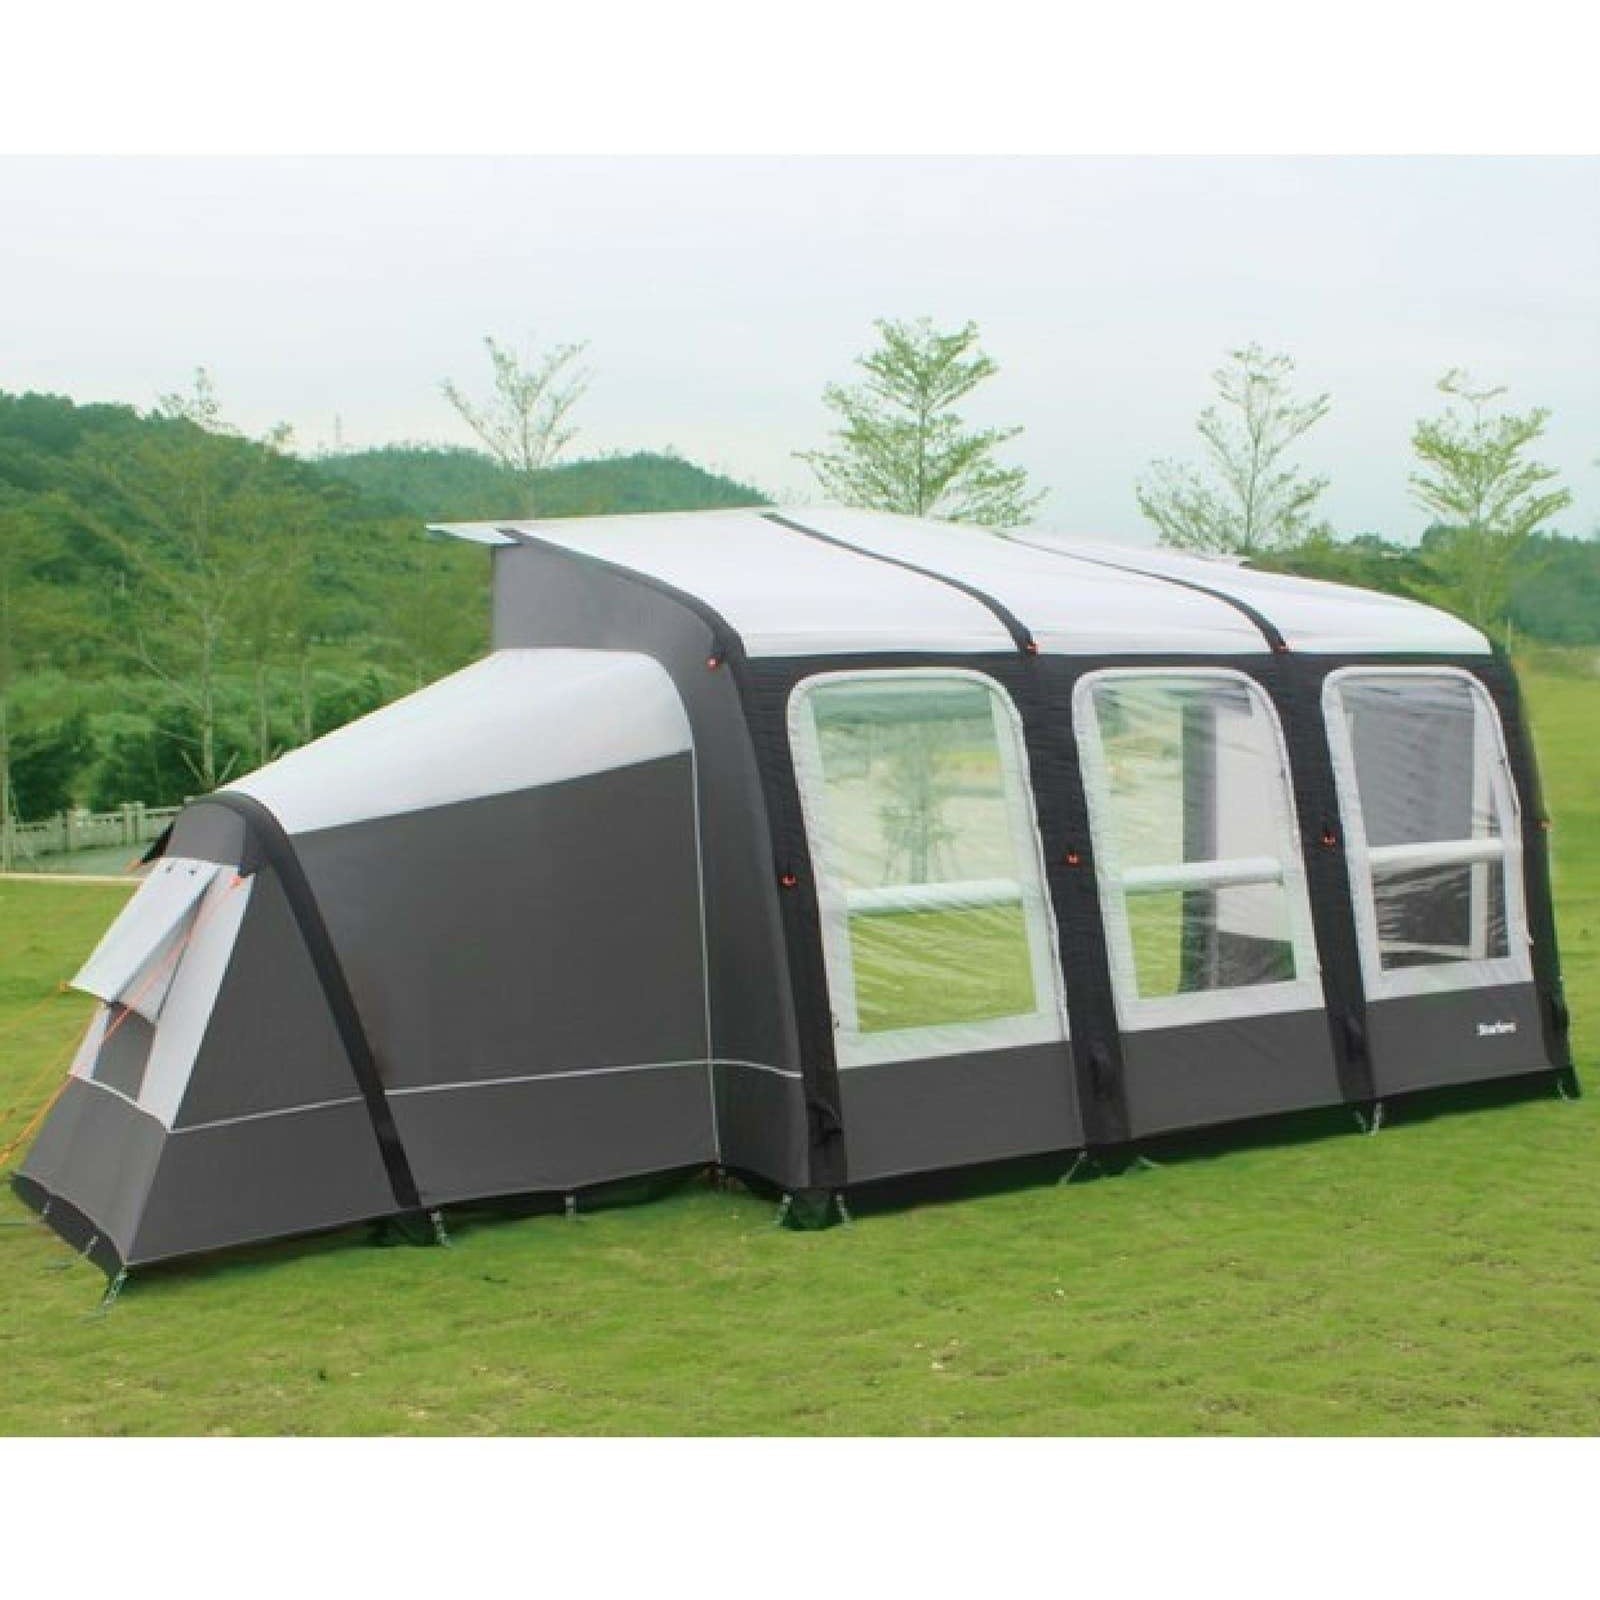 Camptech Starline 390 Inflatable Caravan Awning FREE Straps 2018